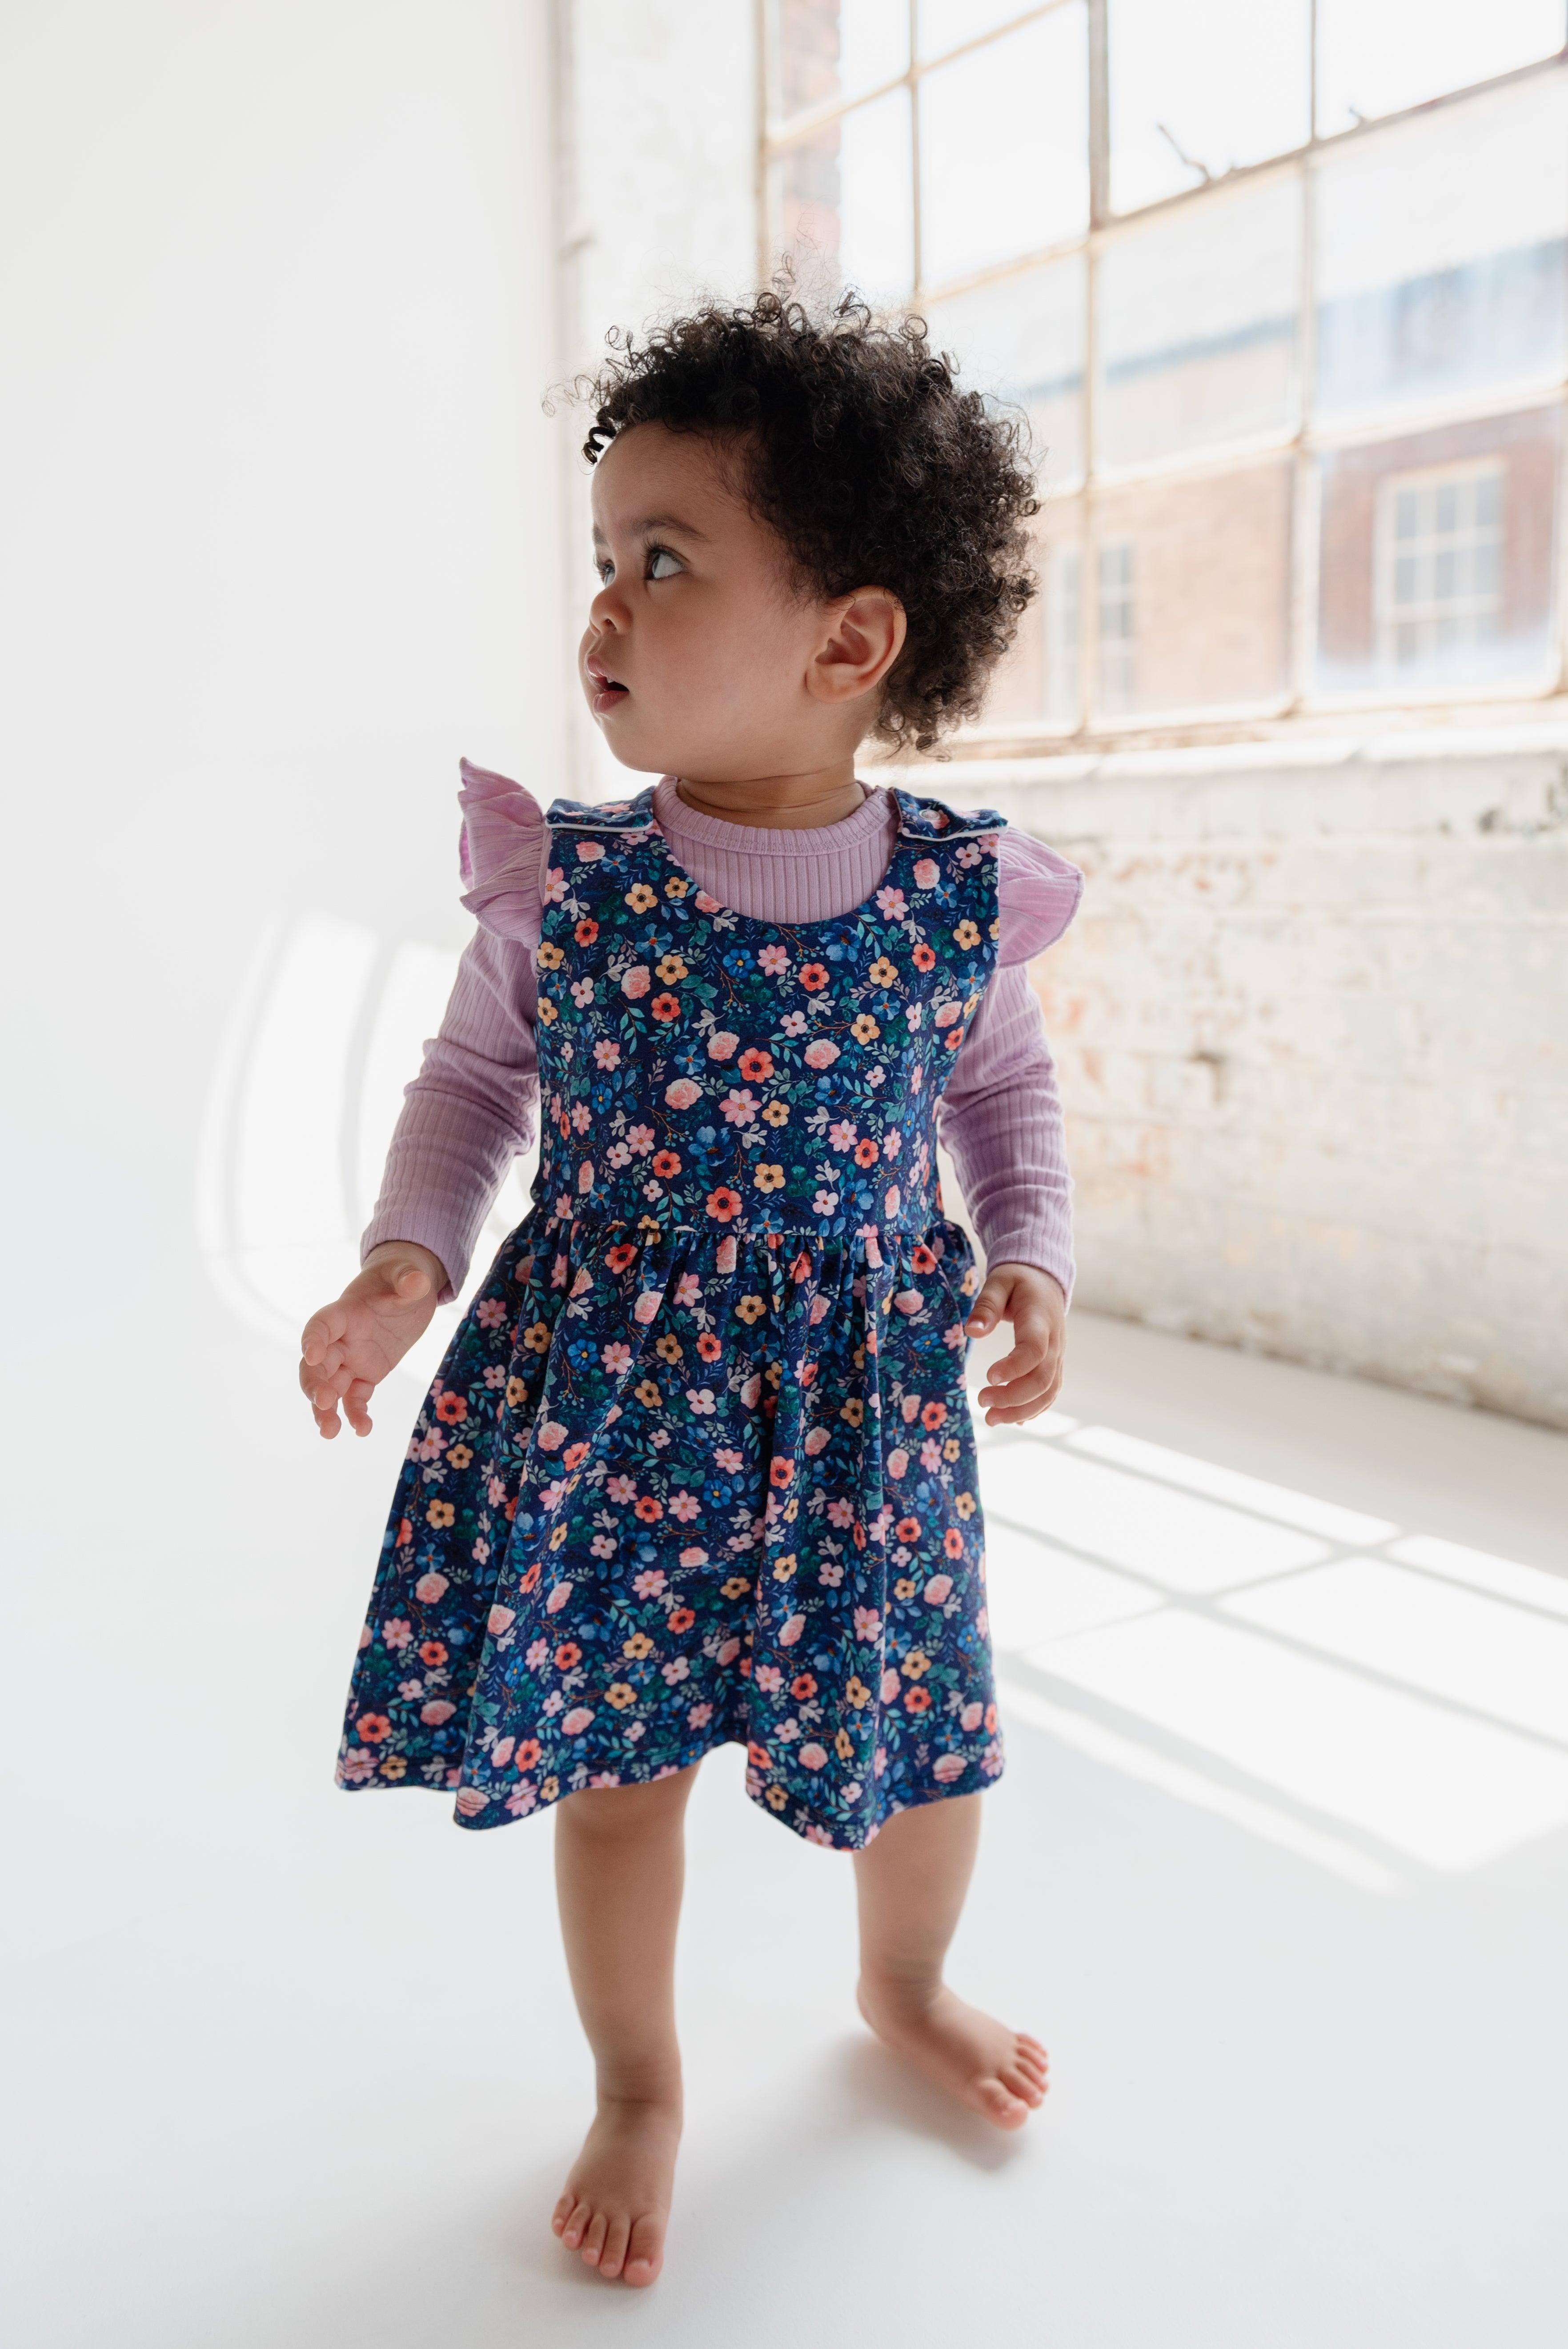 files/navy-dainty-floral-dress-claybearofficial-8.jpg